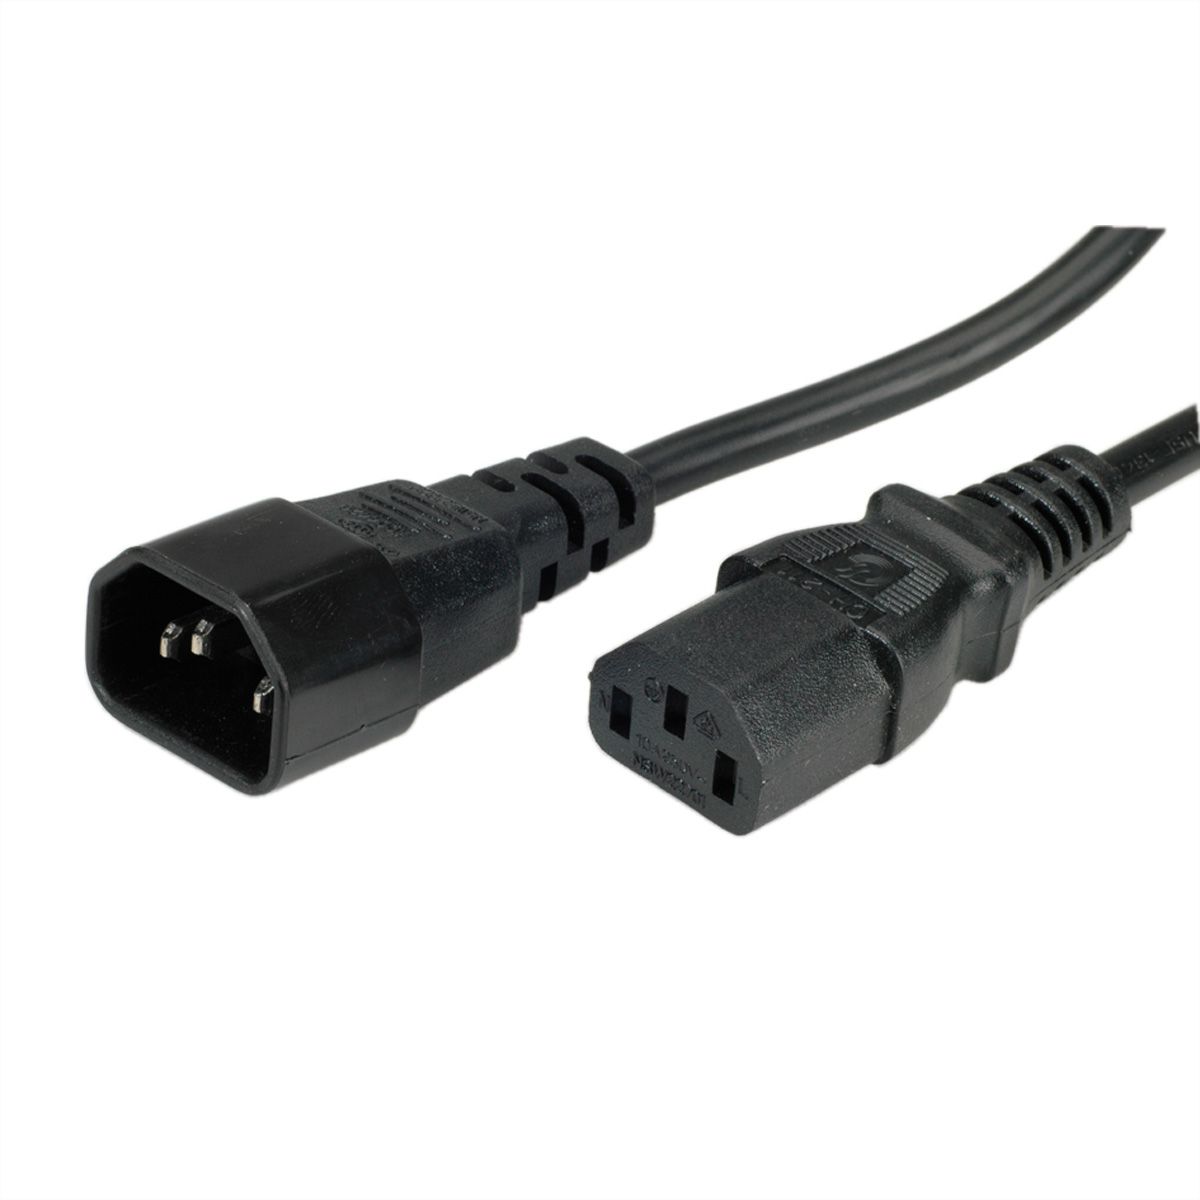 Circus Bewijs medeleerling VALUE Monitor Power Cable, IEC 320 C14 - C13, black, 0.5 m - SECOMP  International AG